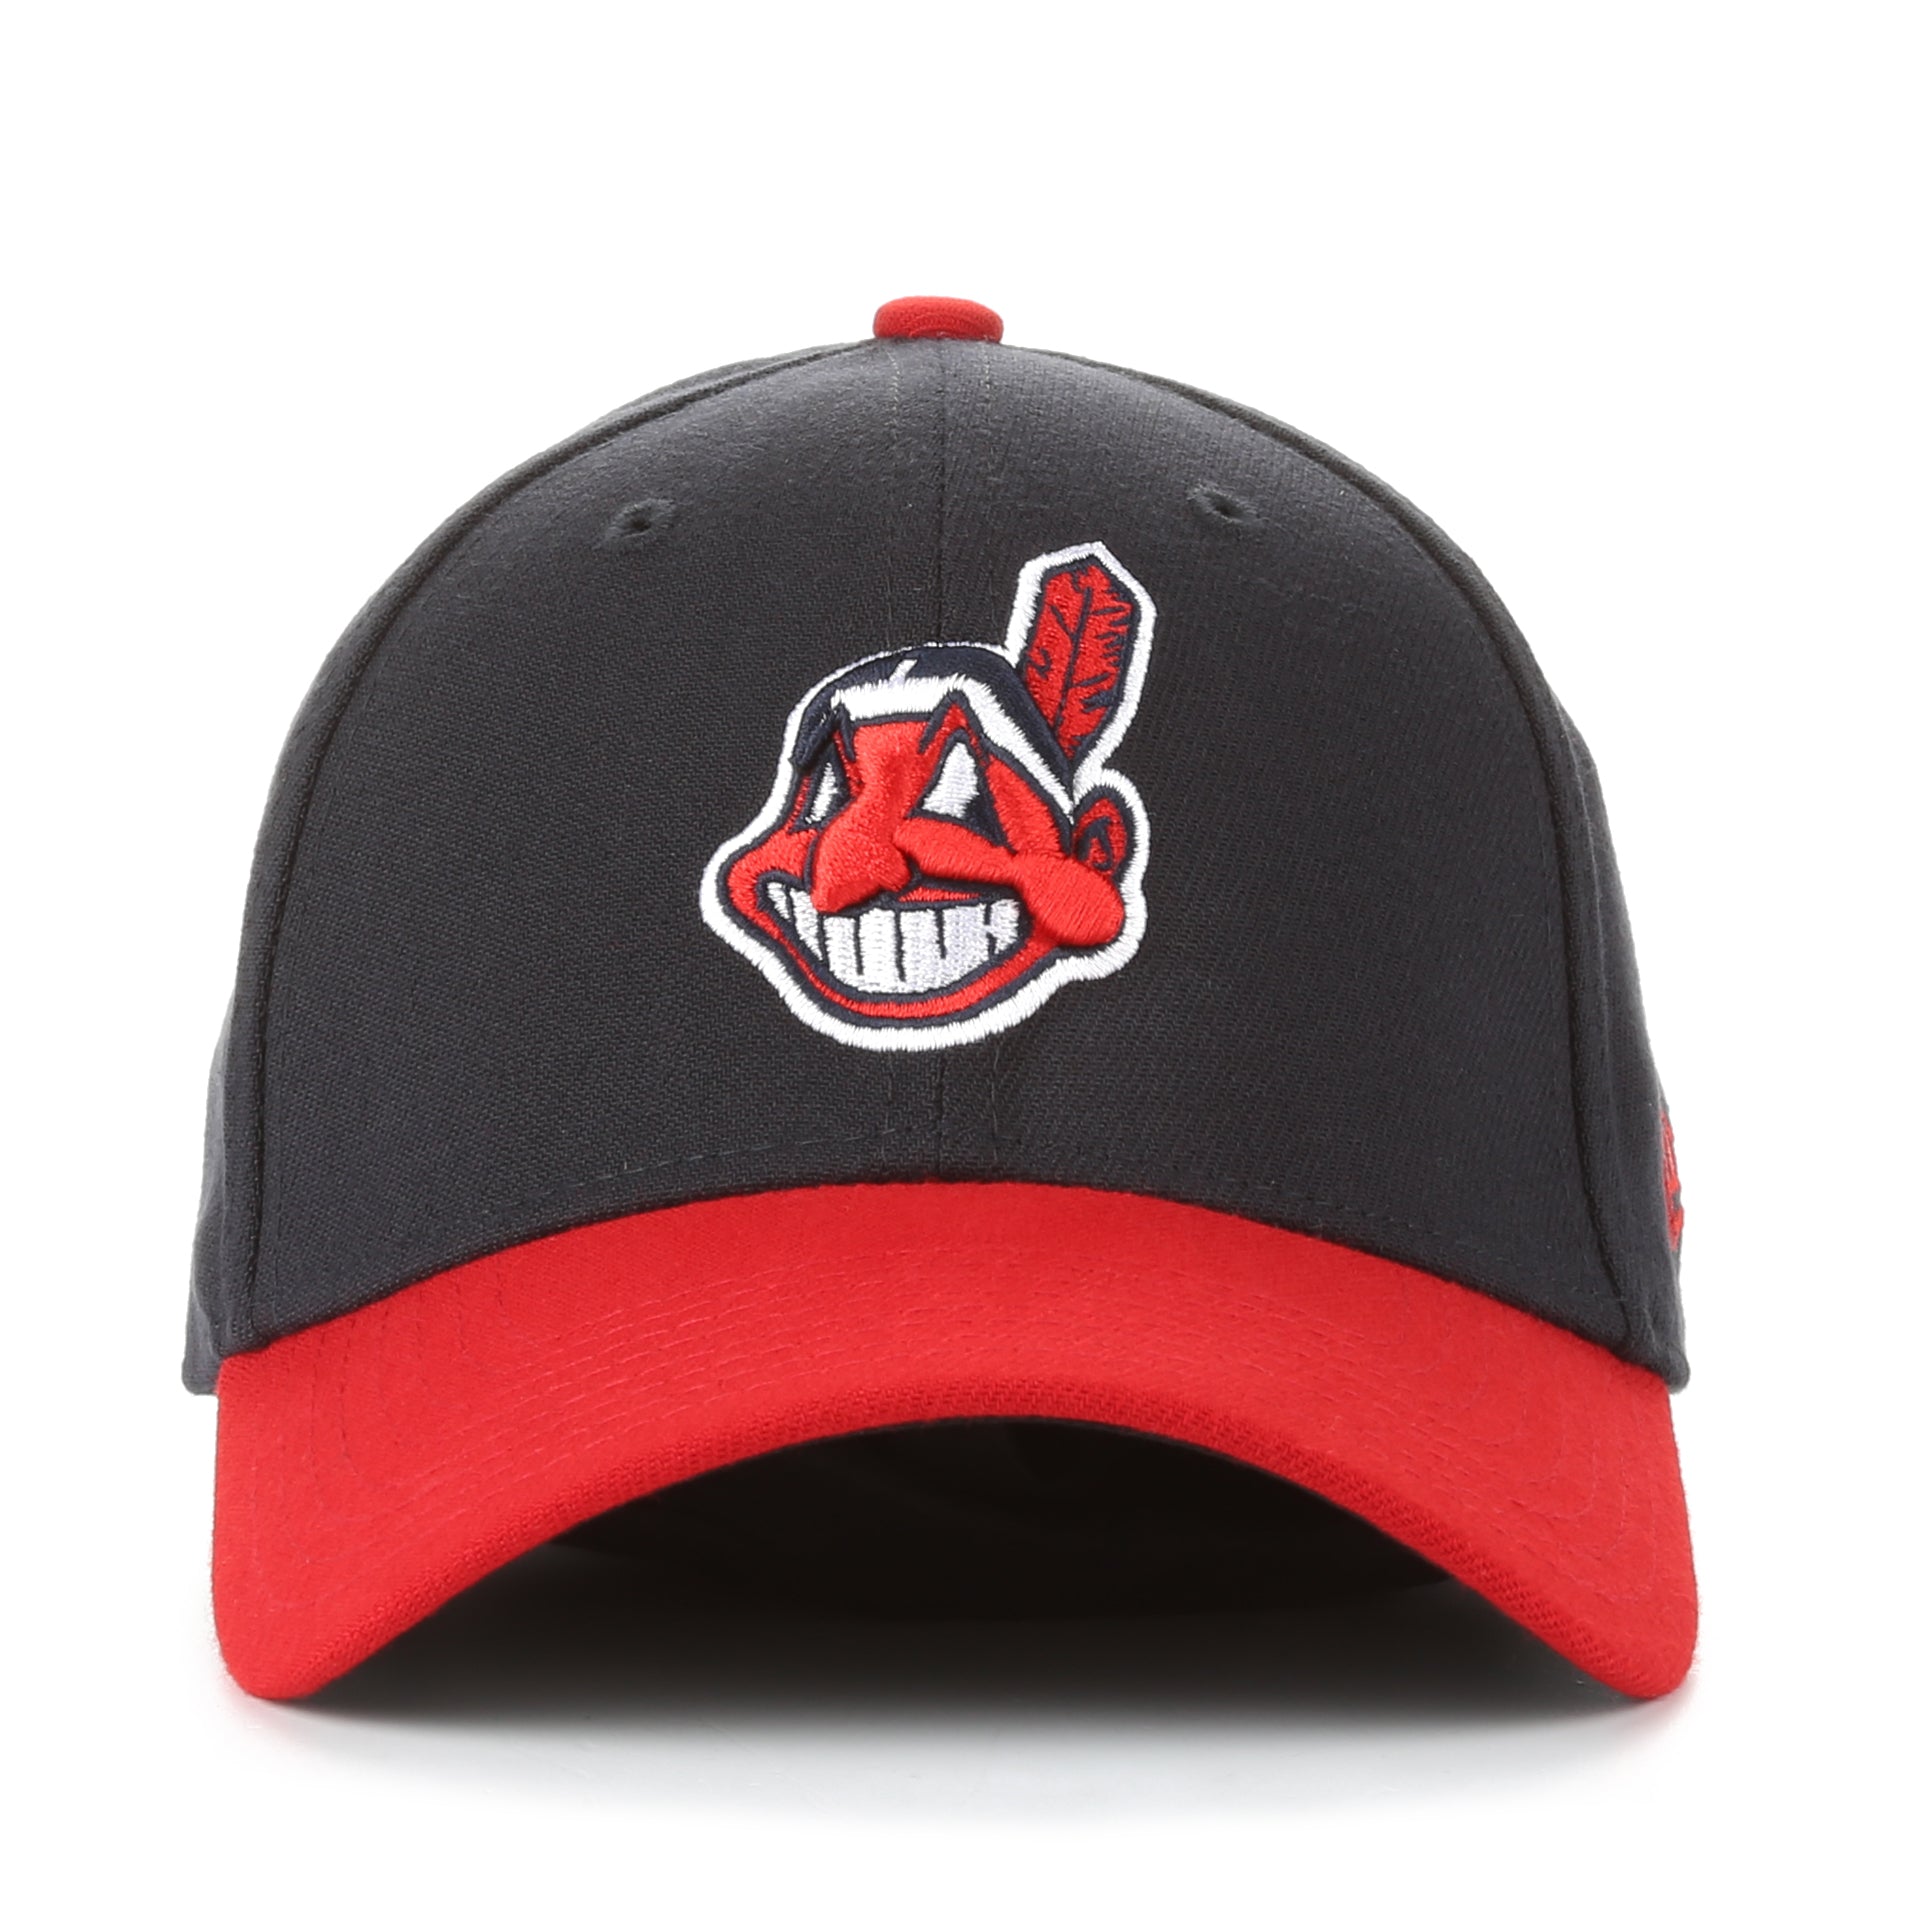 New Era 39Thirty Team Classic Stretch Fit Cap - Cleveland Indians